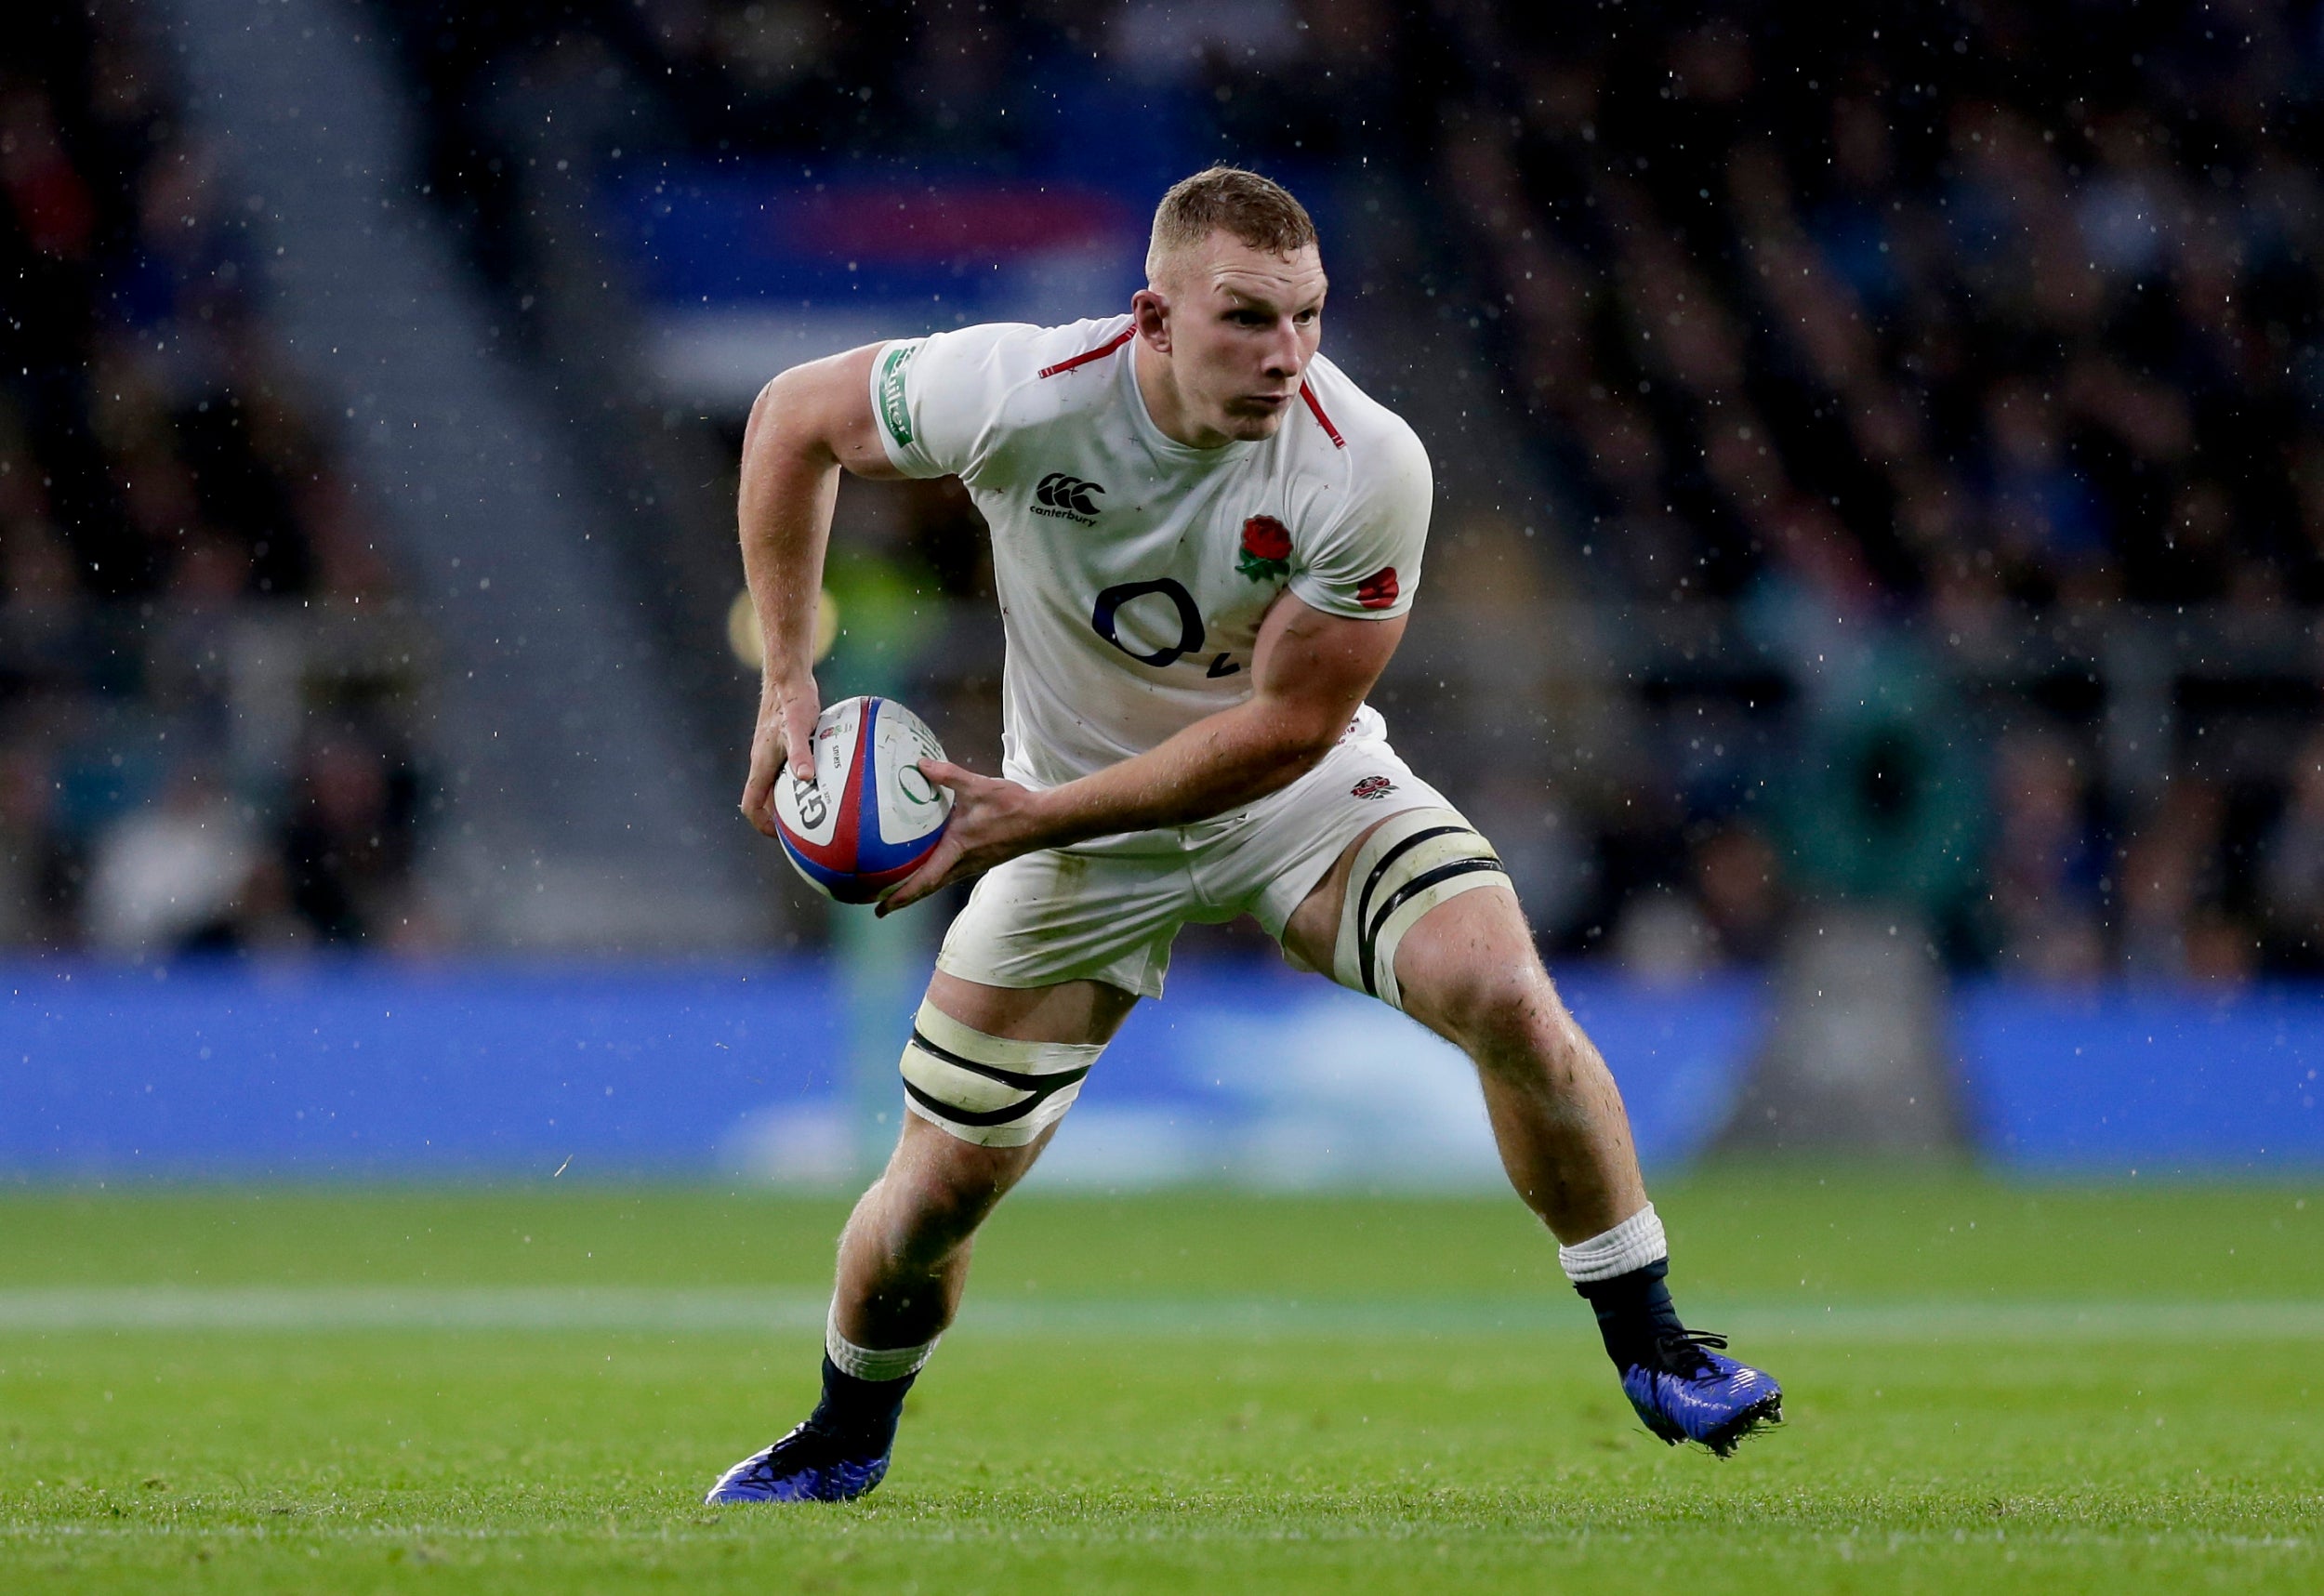 Underhill had been at his best for England and Bath before the injury (Getty)